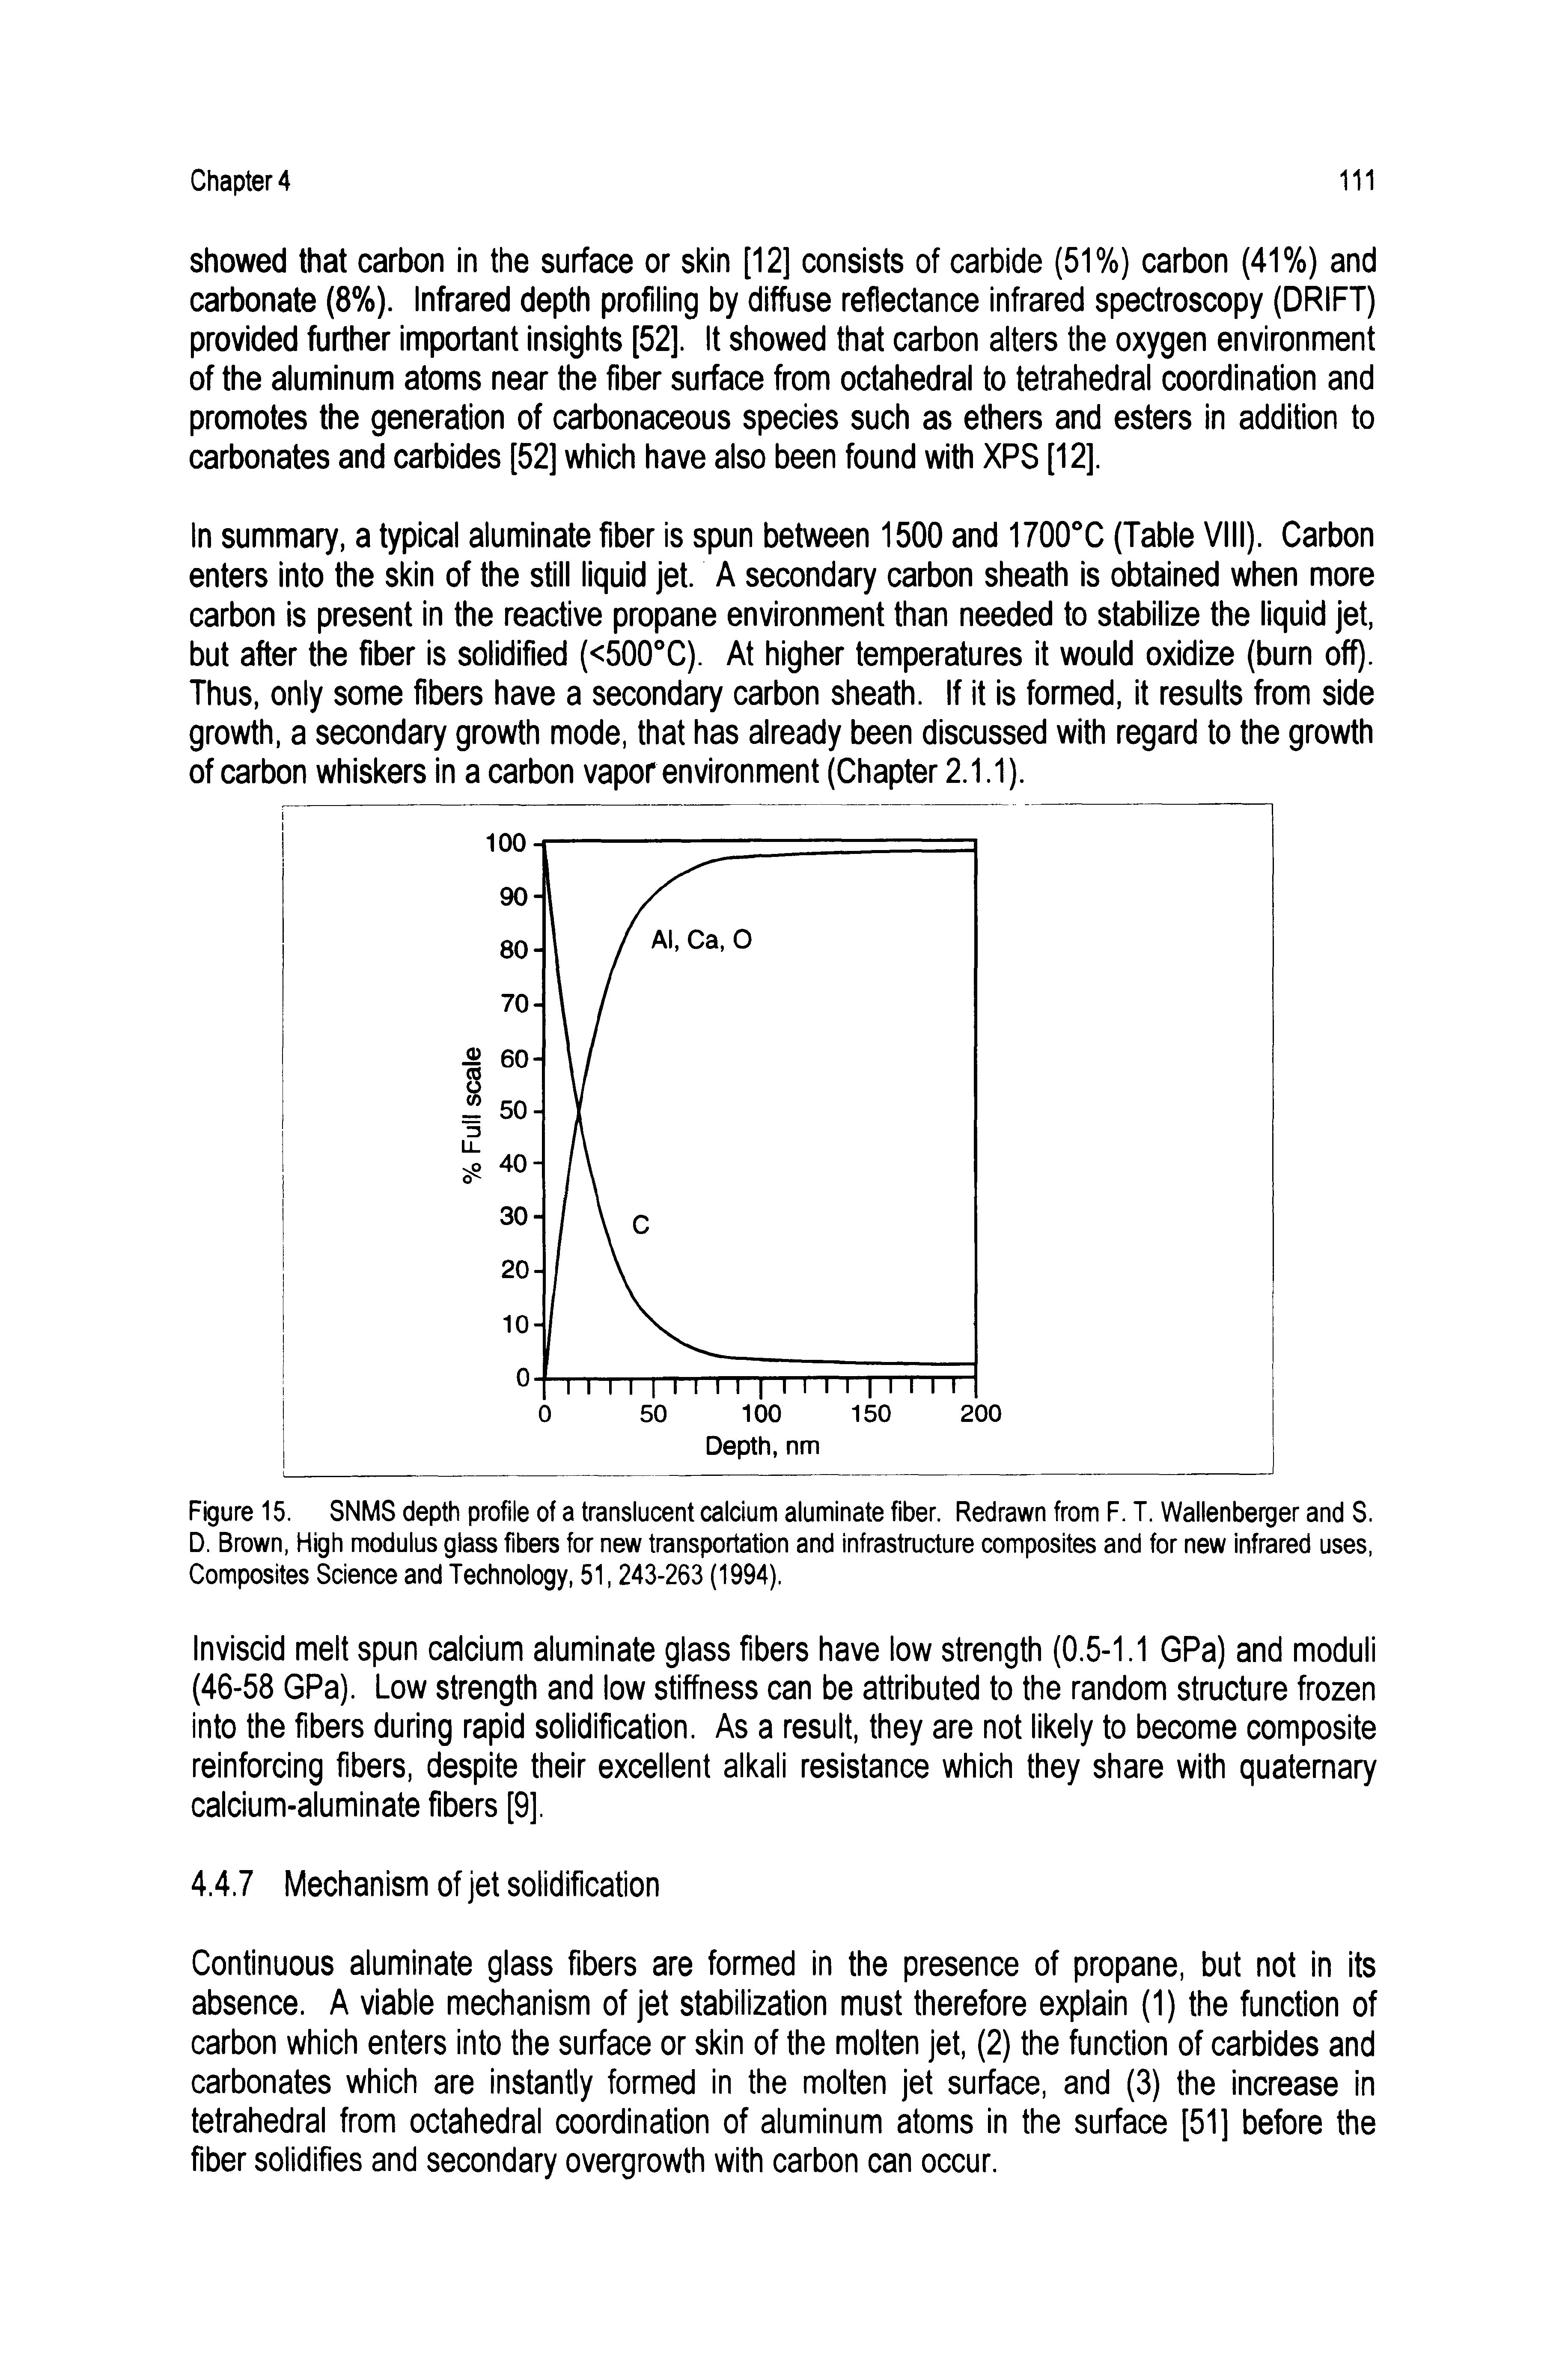 Figure 15. SNMS depth profile of a translucent calcium aluminate fiber. Redrawn from F. T. Wallenberger and S. D. Brown, High modulus glass fibers for new transportation and infrastructure composites and for new infrared uses, Composites Science and Technology, 51,243-263 (1994).